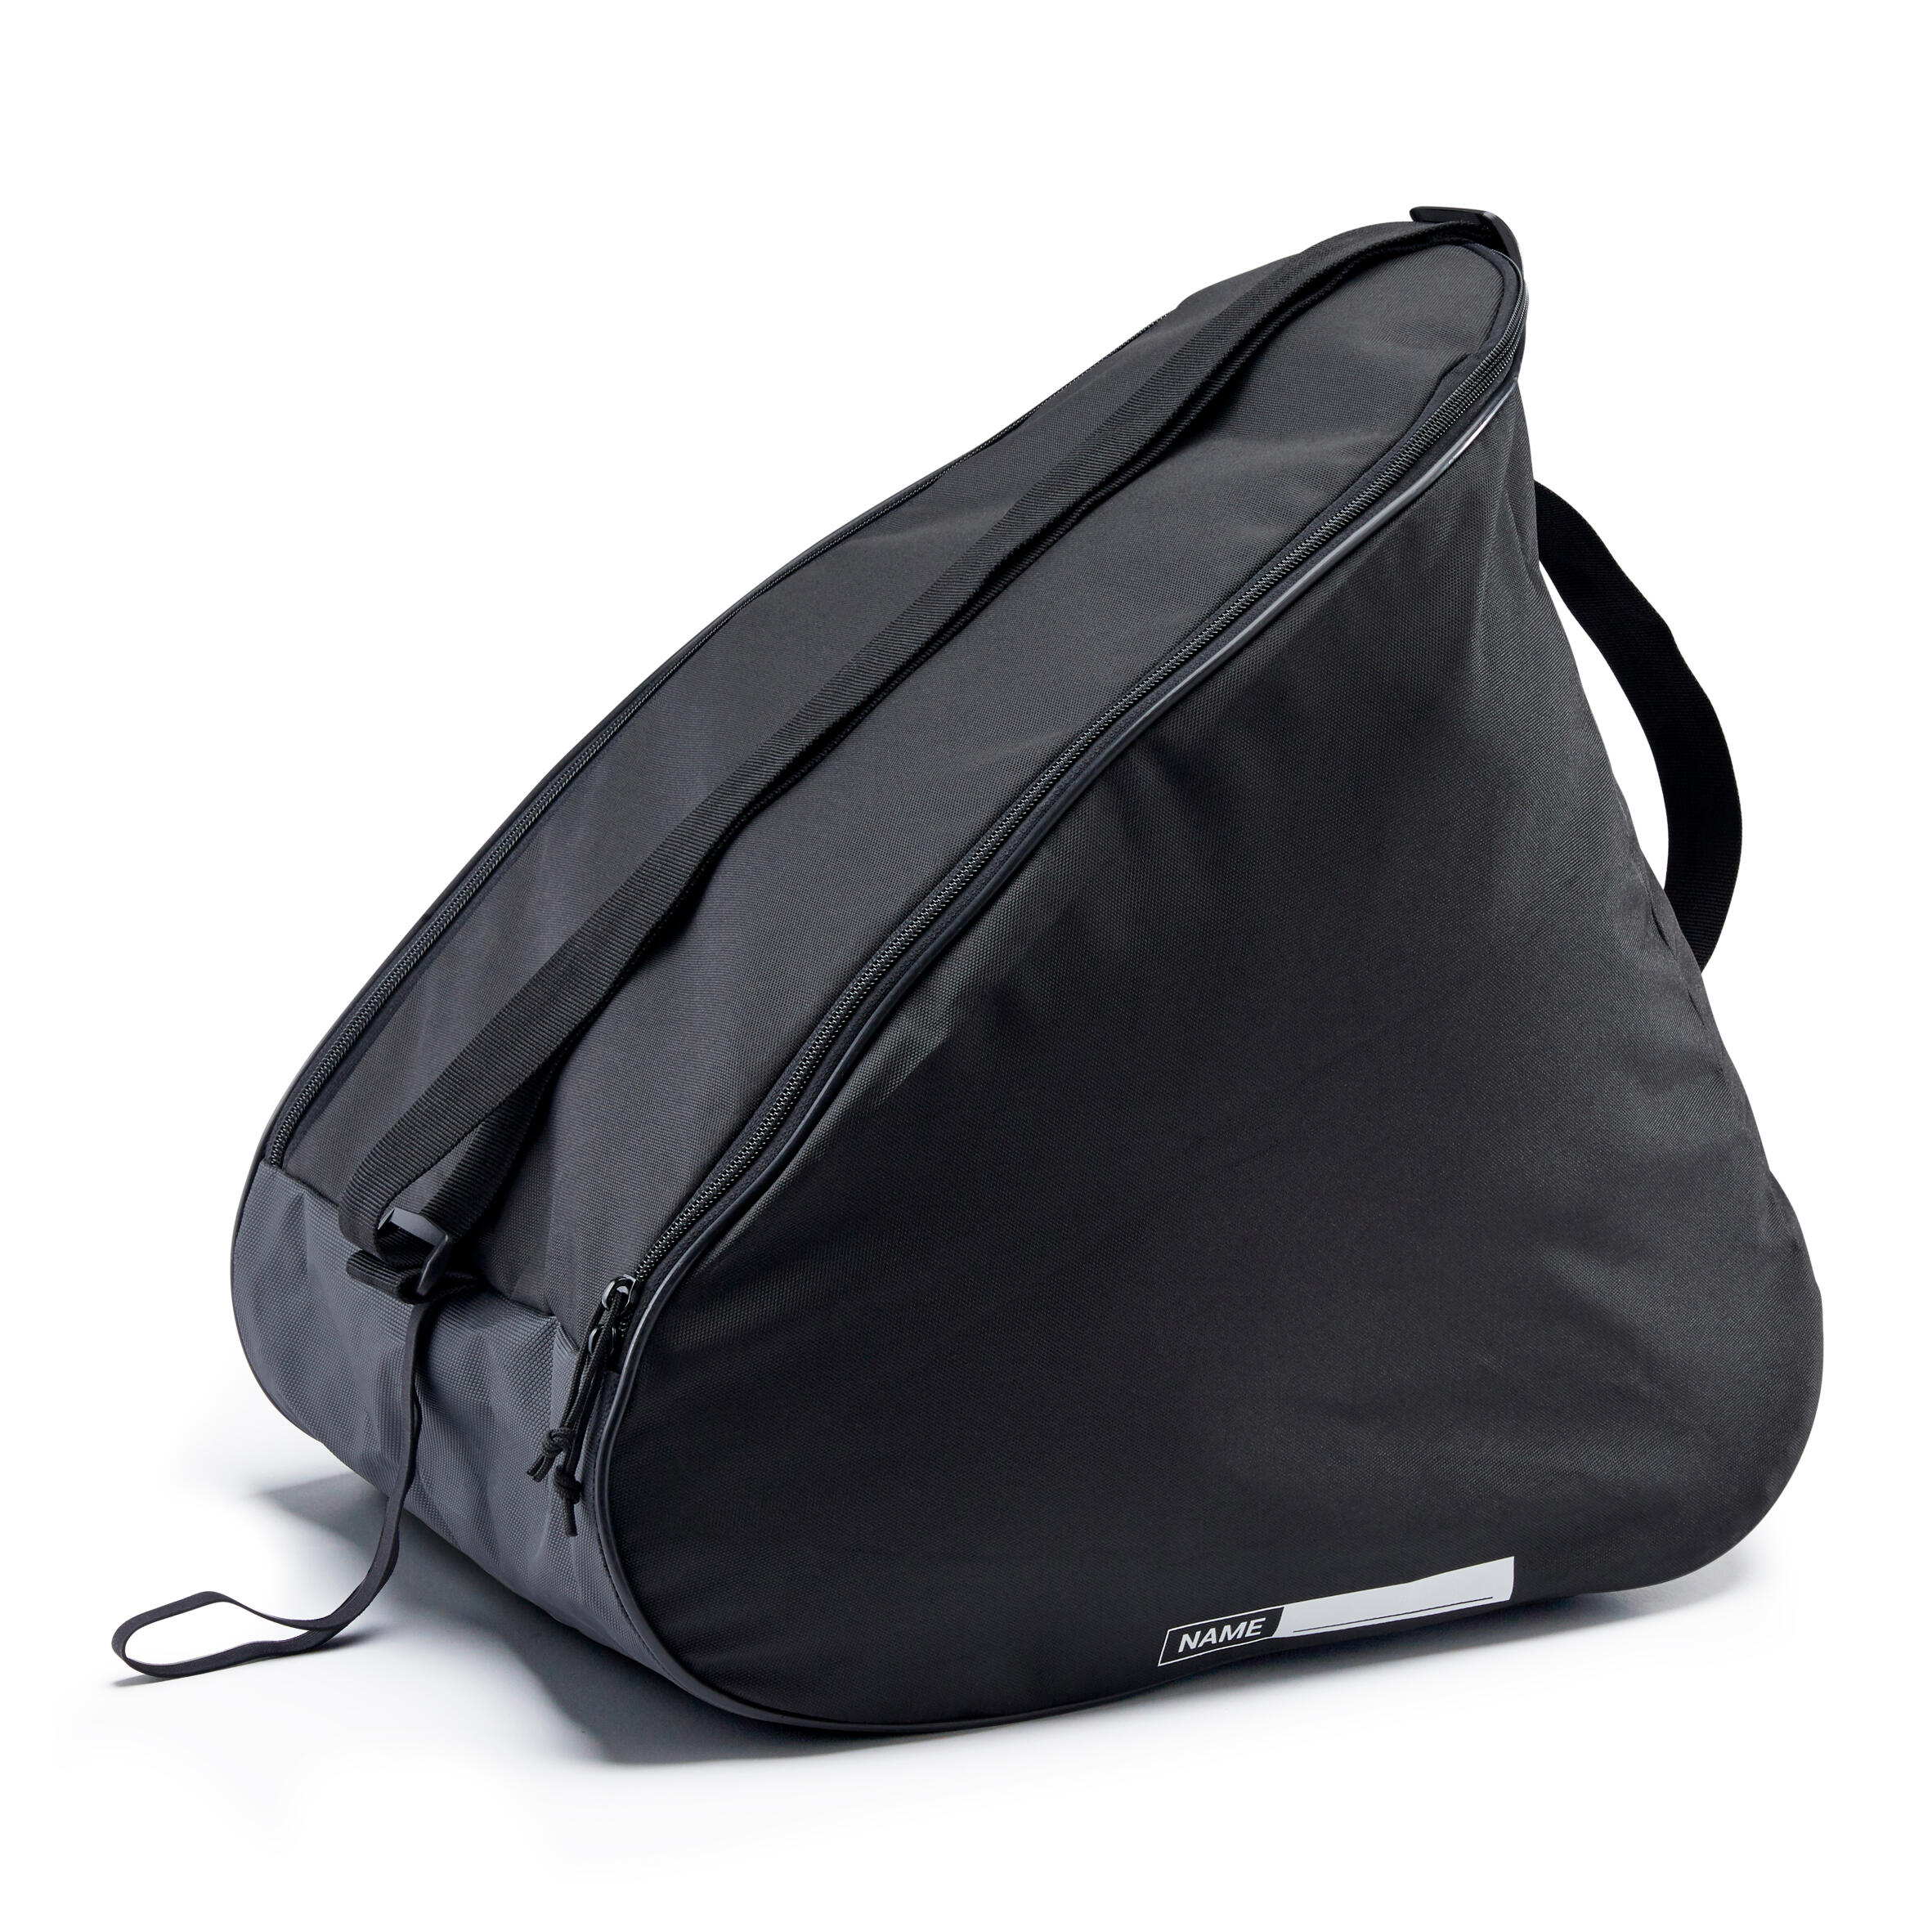 500 Fit XL in-line skating bag - Adults - OXELO